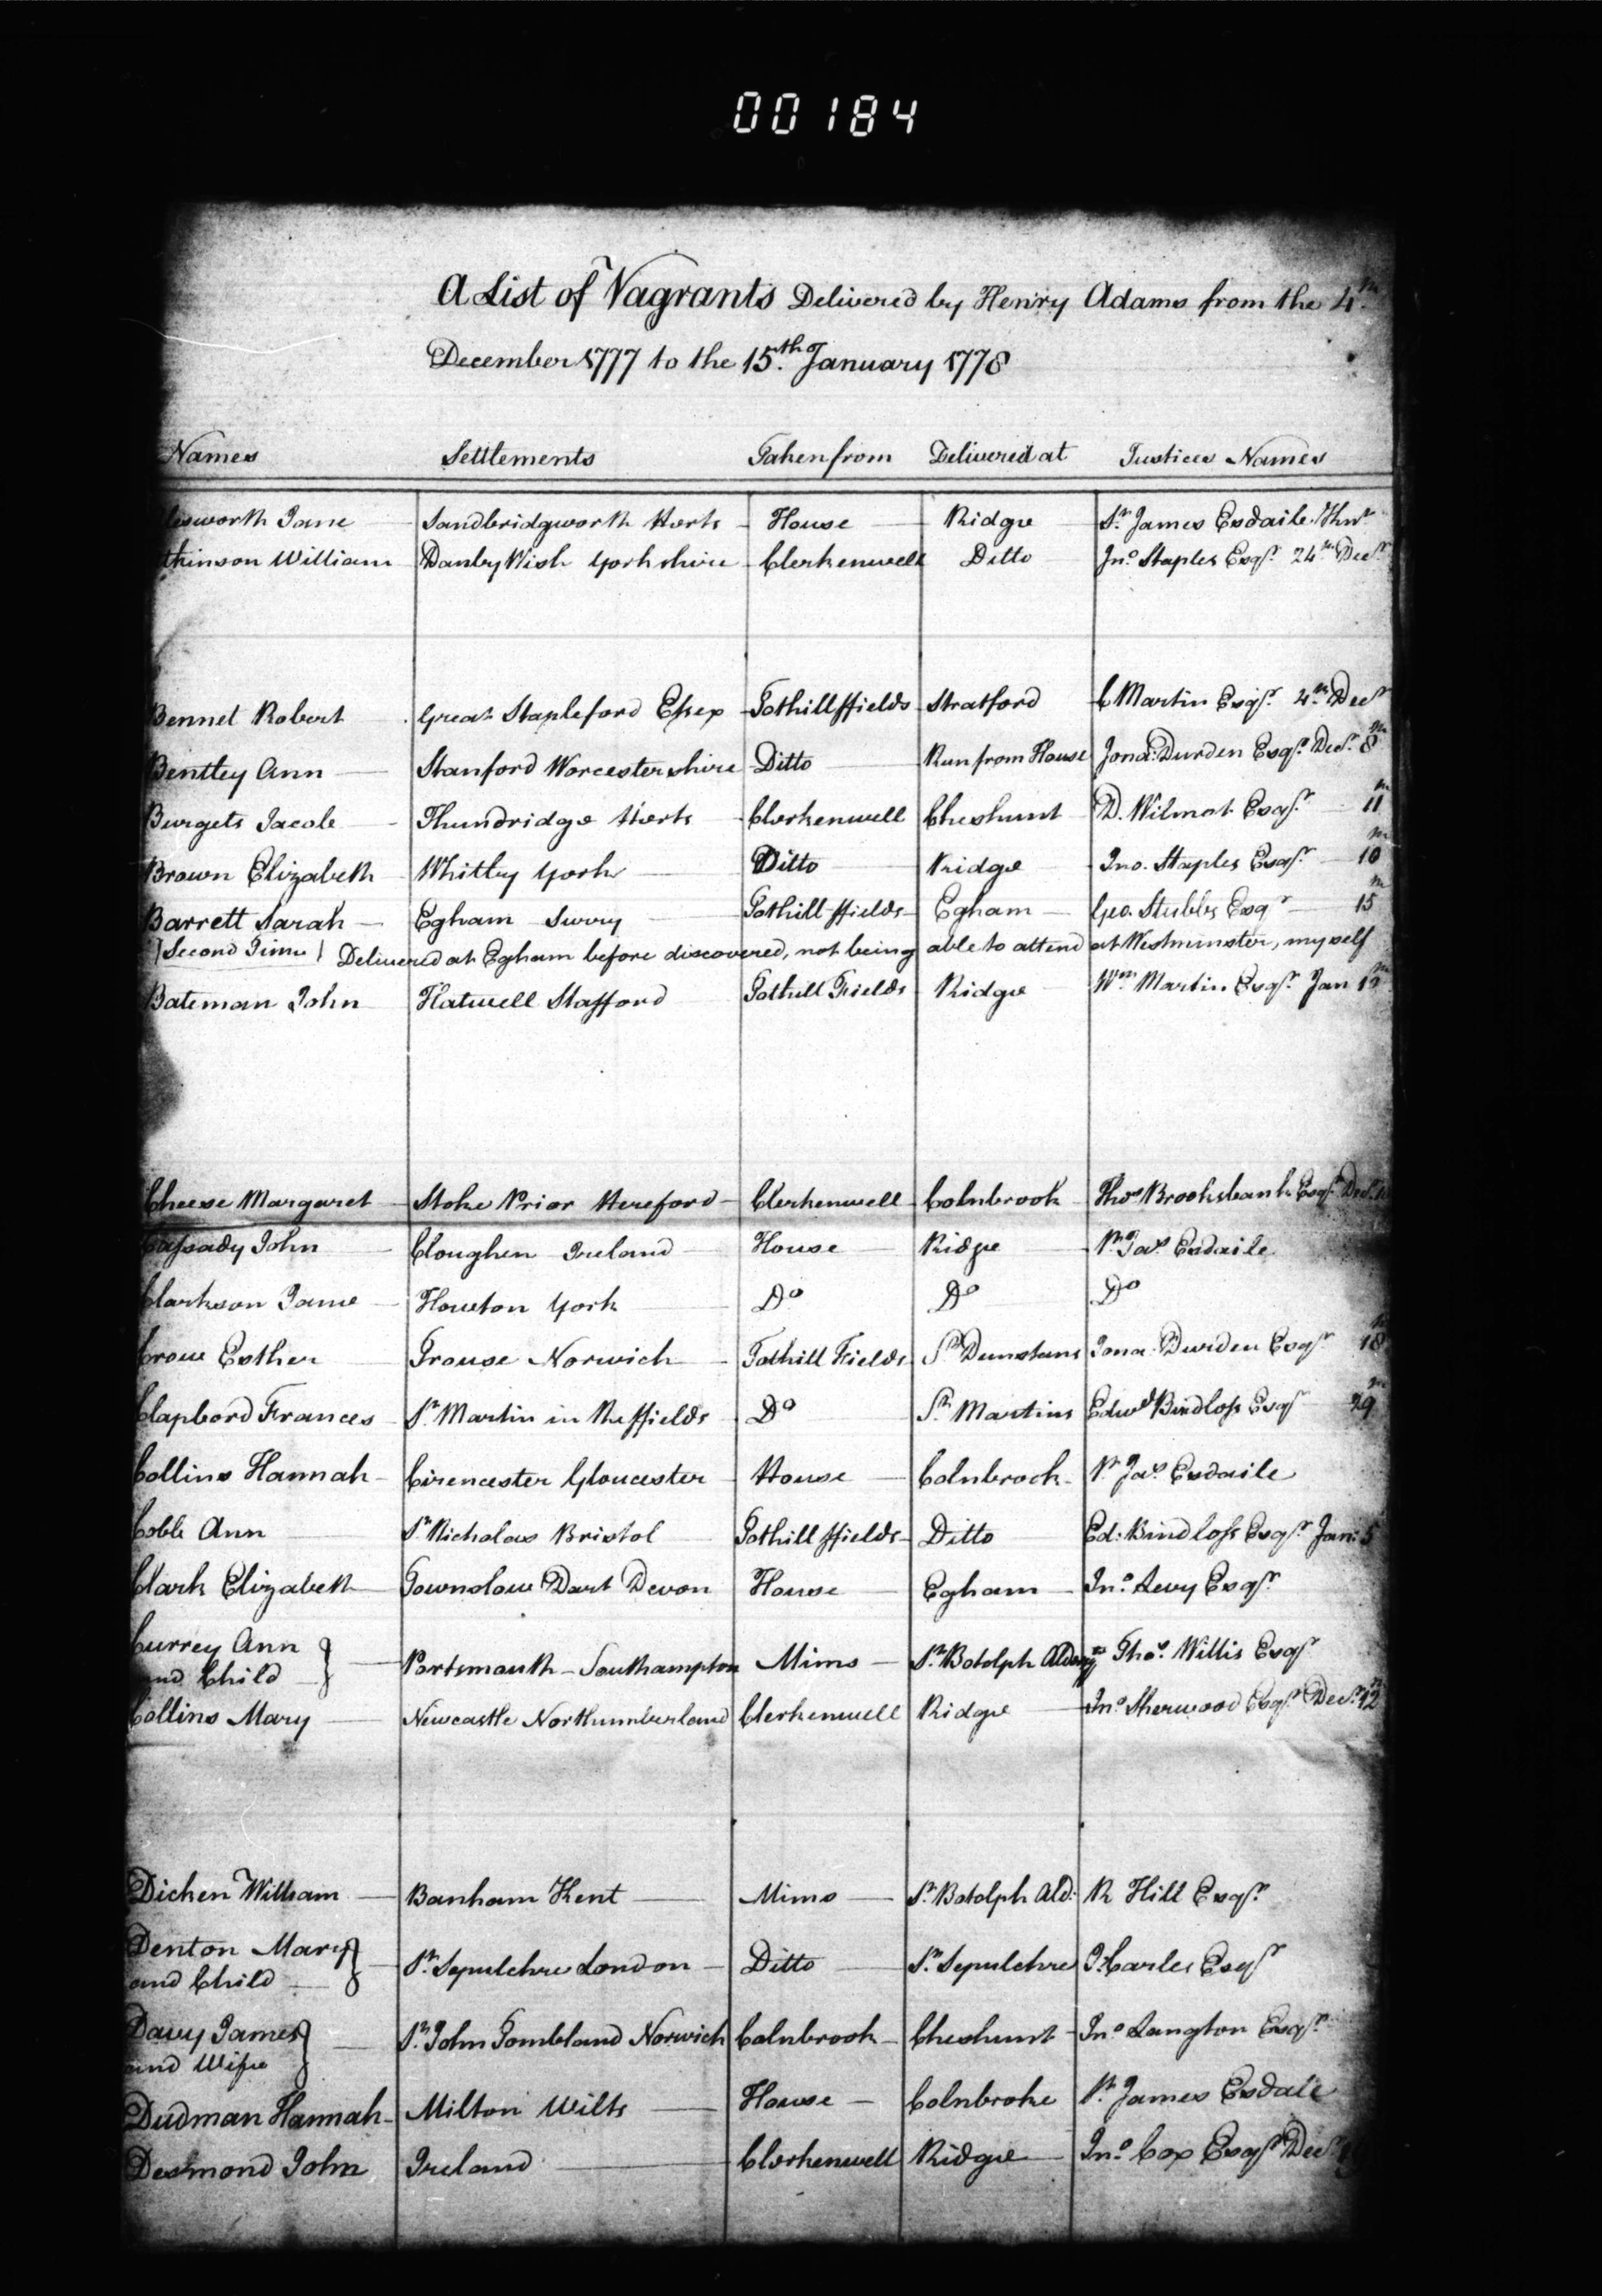 Figure 3: A sample list of vagrants expelled from Middlesex. 'Middlesex Sessions Papers - Justices' Working Documents', (January 1778), *London Lives, 1690-1800*, LMSMPS50677PS506770118 (www.londonlives.org, version 2.0, 18 August 2018), London Metropolitan Archives.